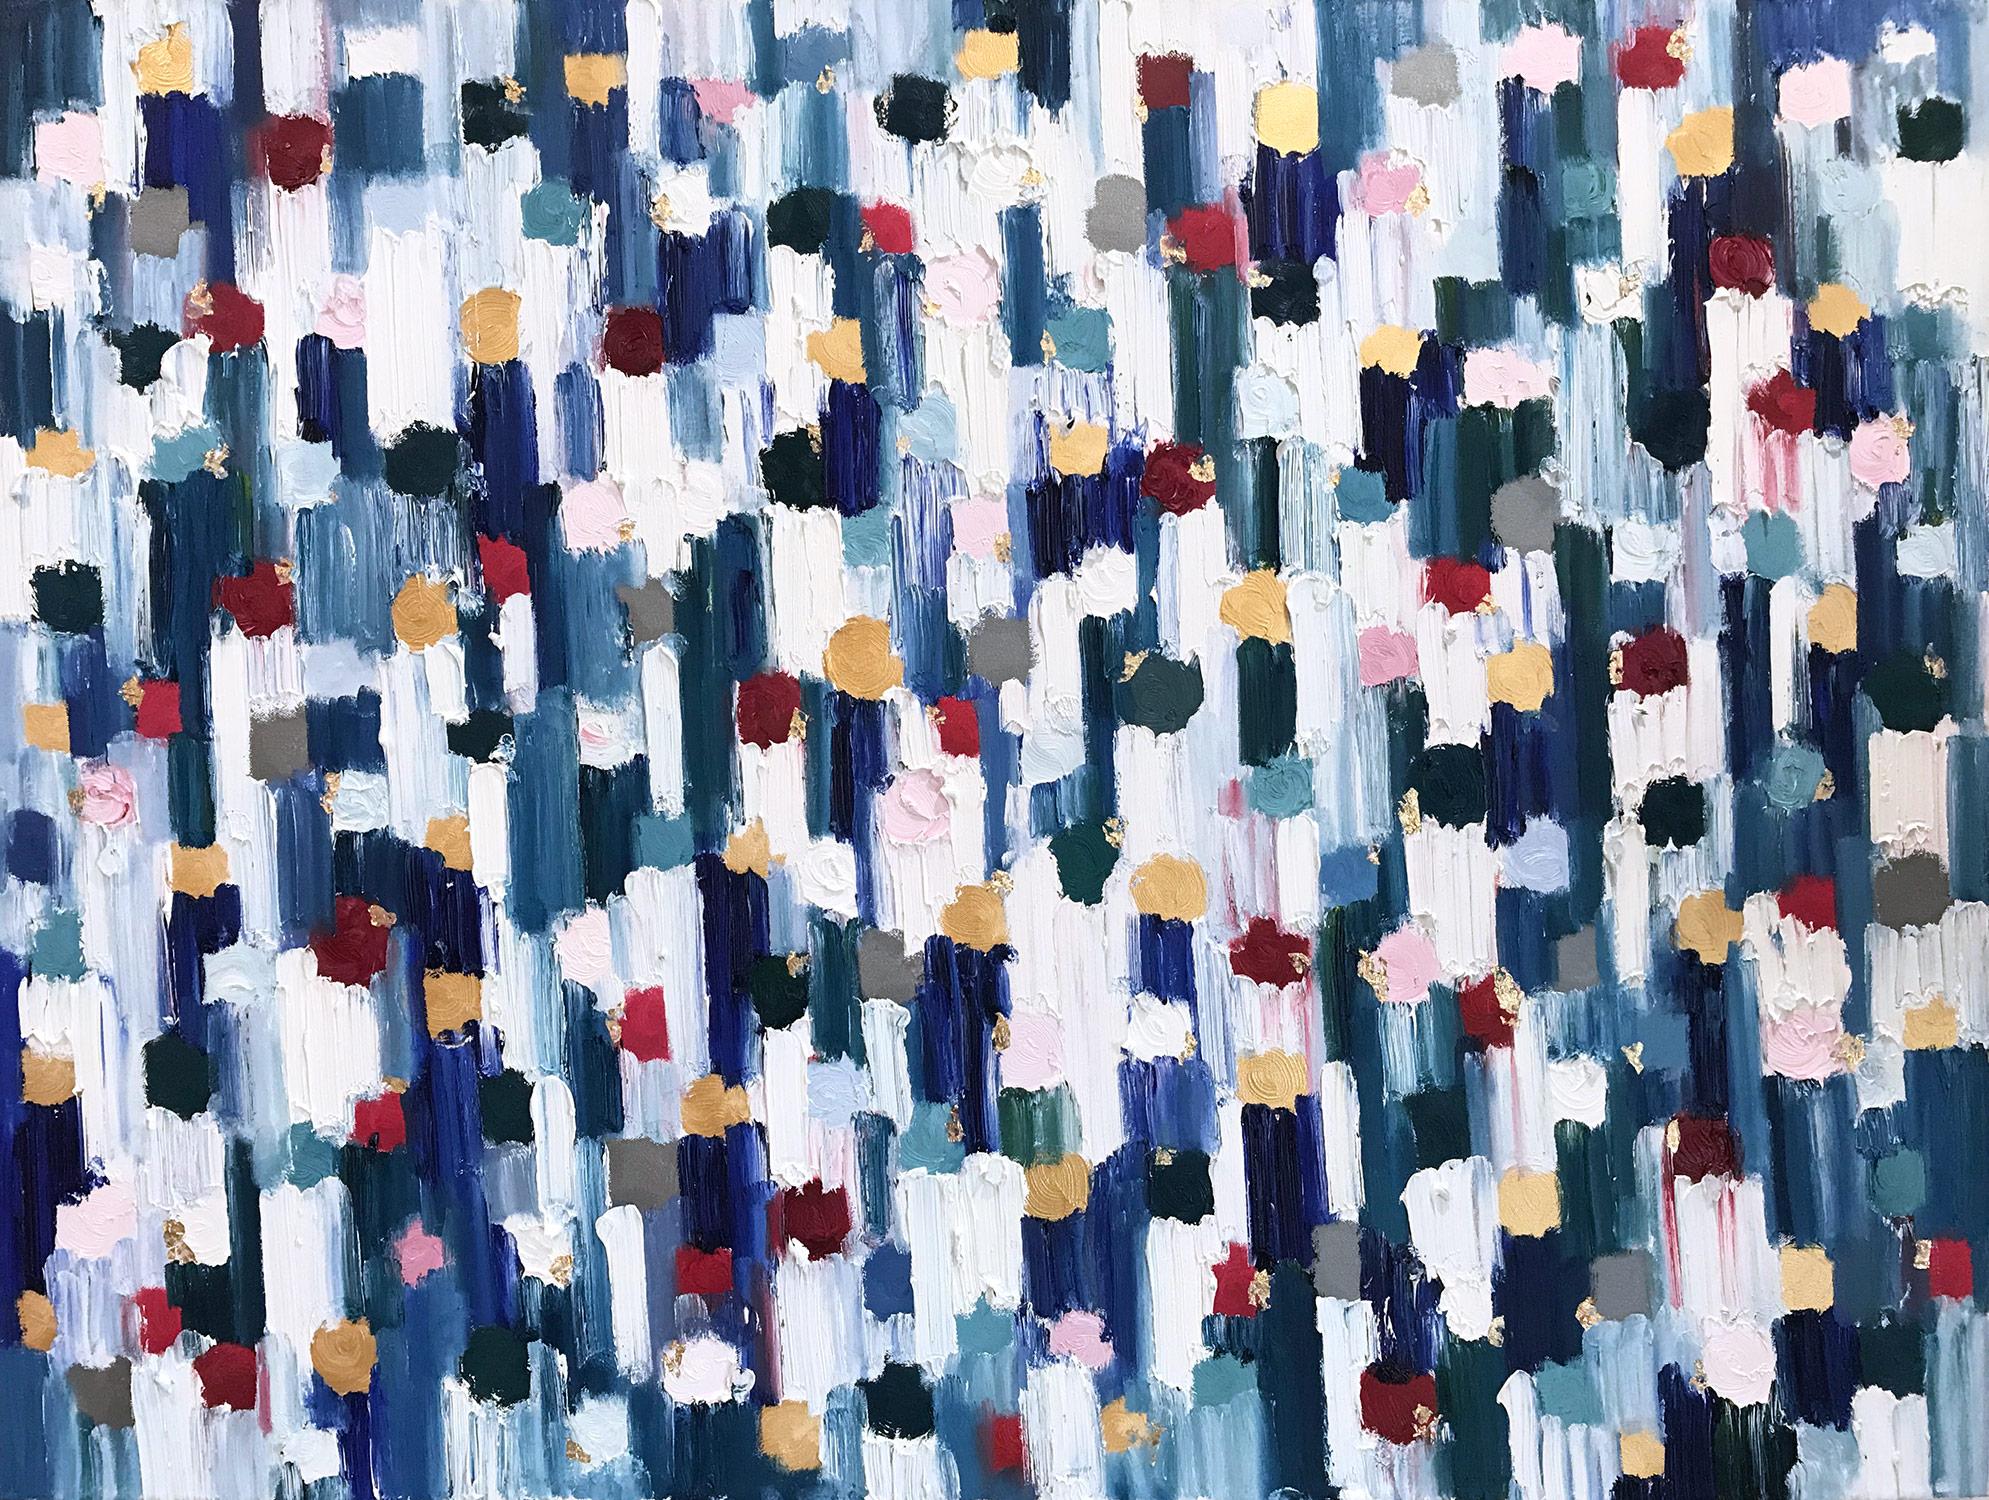 Cindy Shaoul Abstract Painting - "Dripping Dots - Province Paris" Colorful Abstract Oil Painting on Canvas